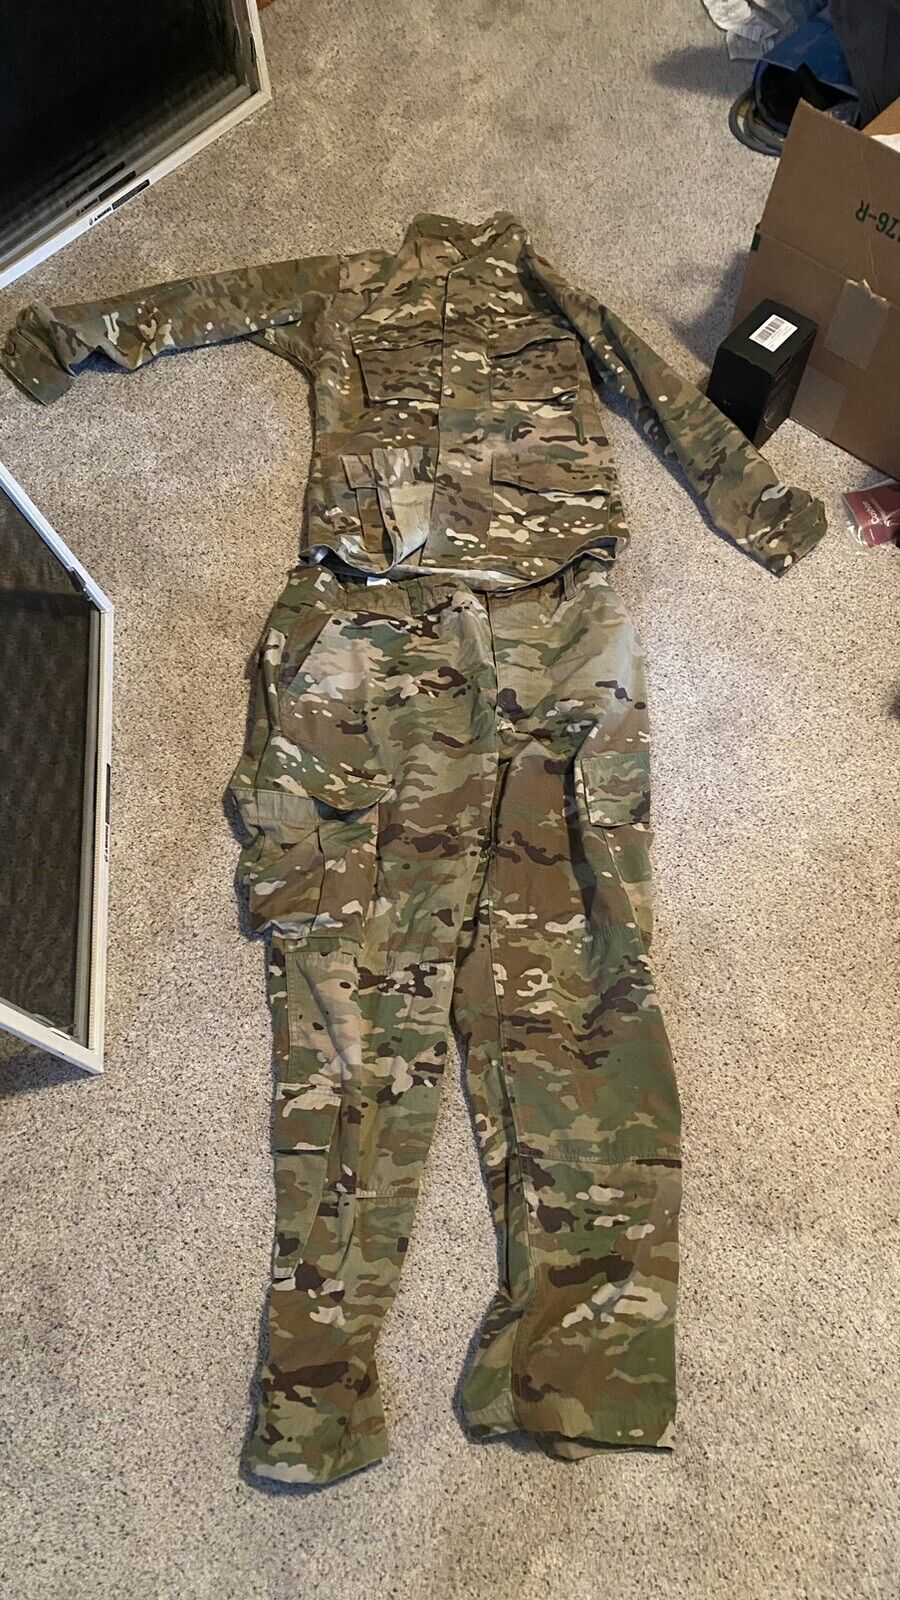 army combat uniform shirt and pants - perfect for airsoft